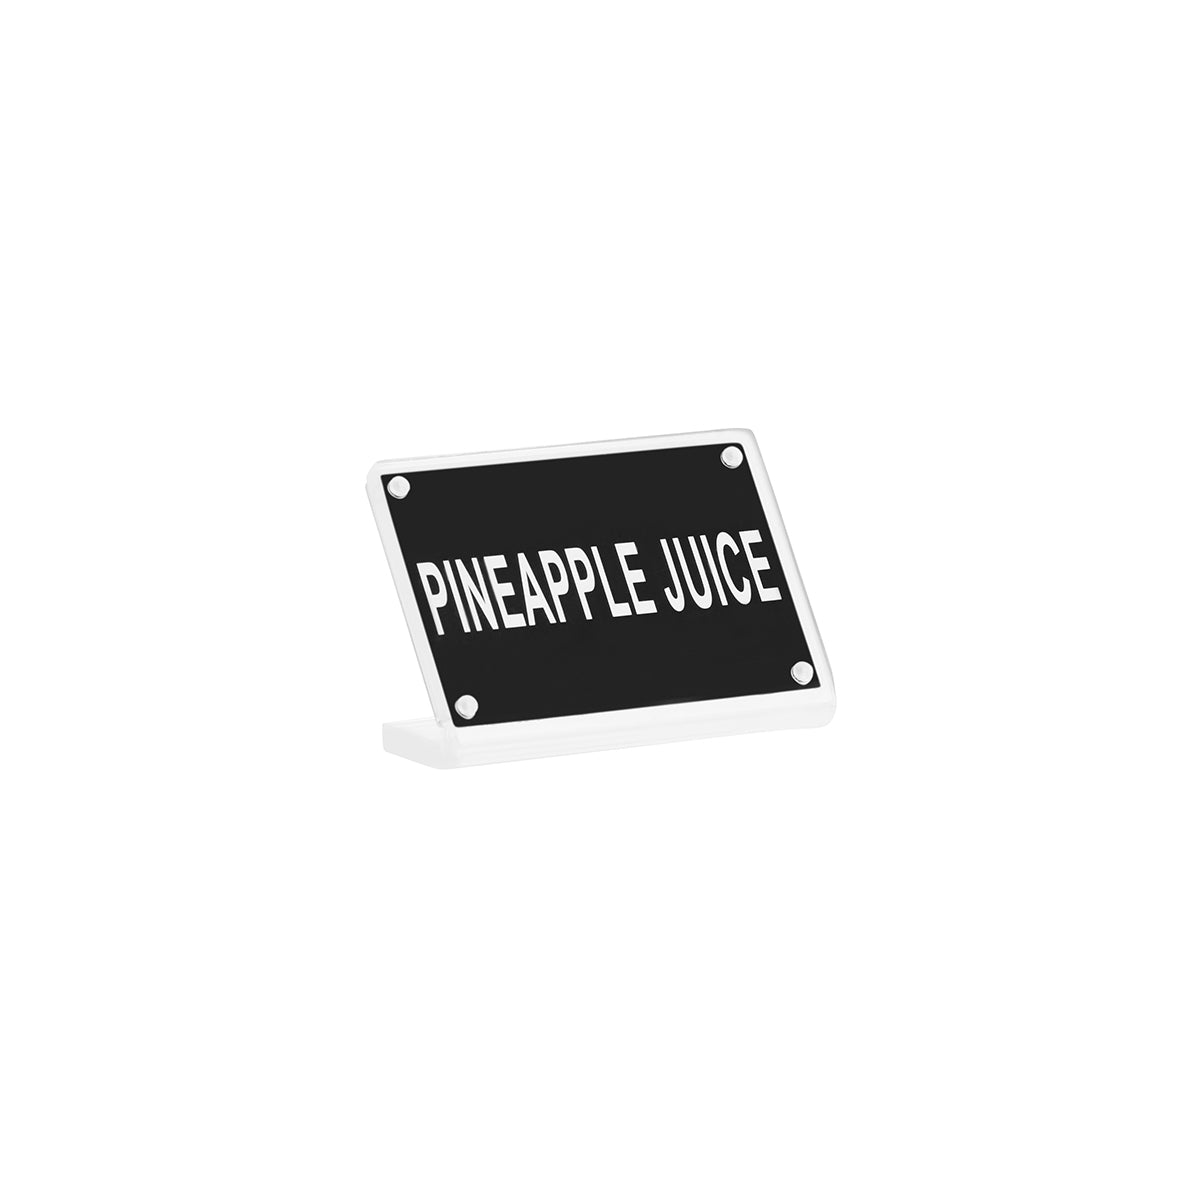 81319 Chef Inox Buffet Sign Acrylic with Magnet Plate - Pineapple Juice Tomkin Australia Hospitality Supplies